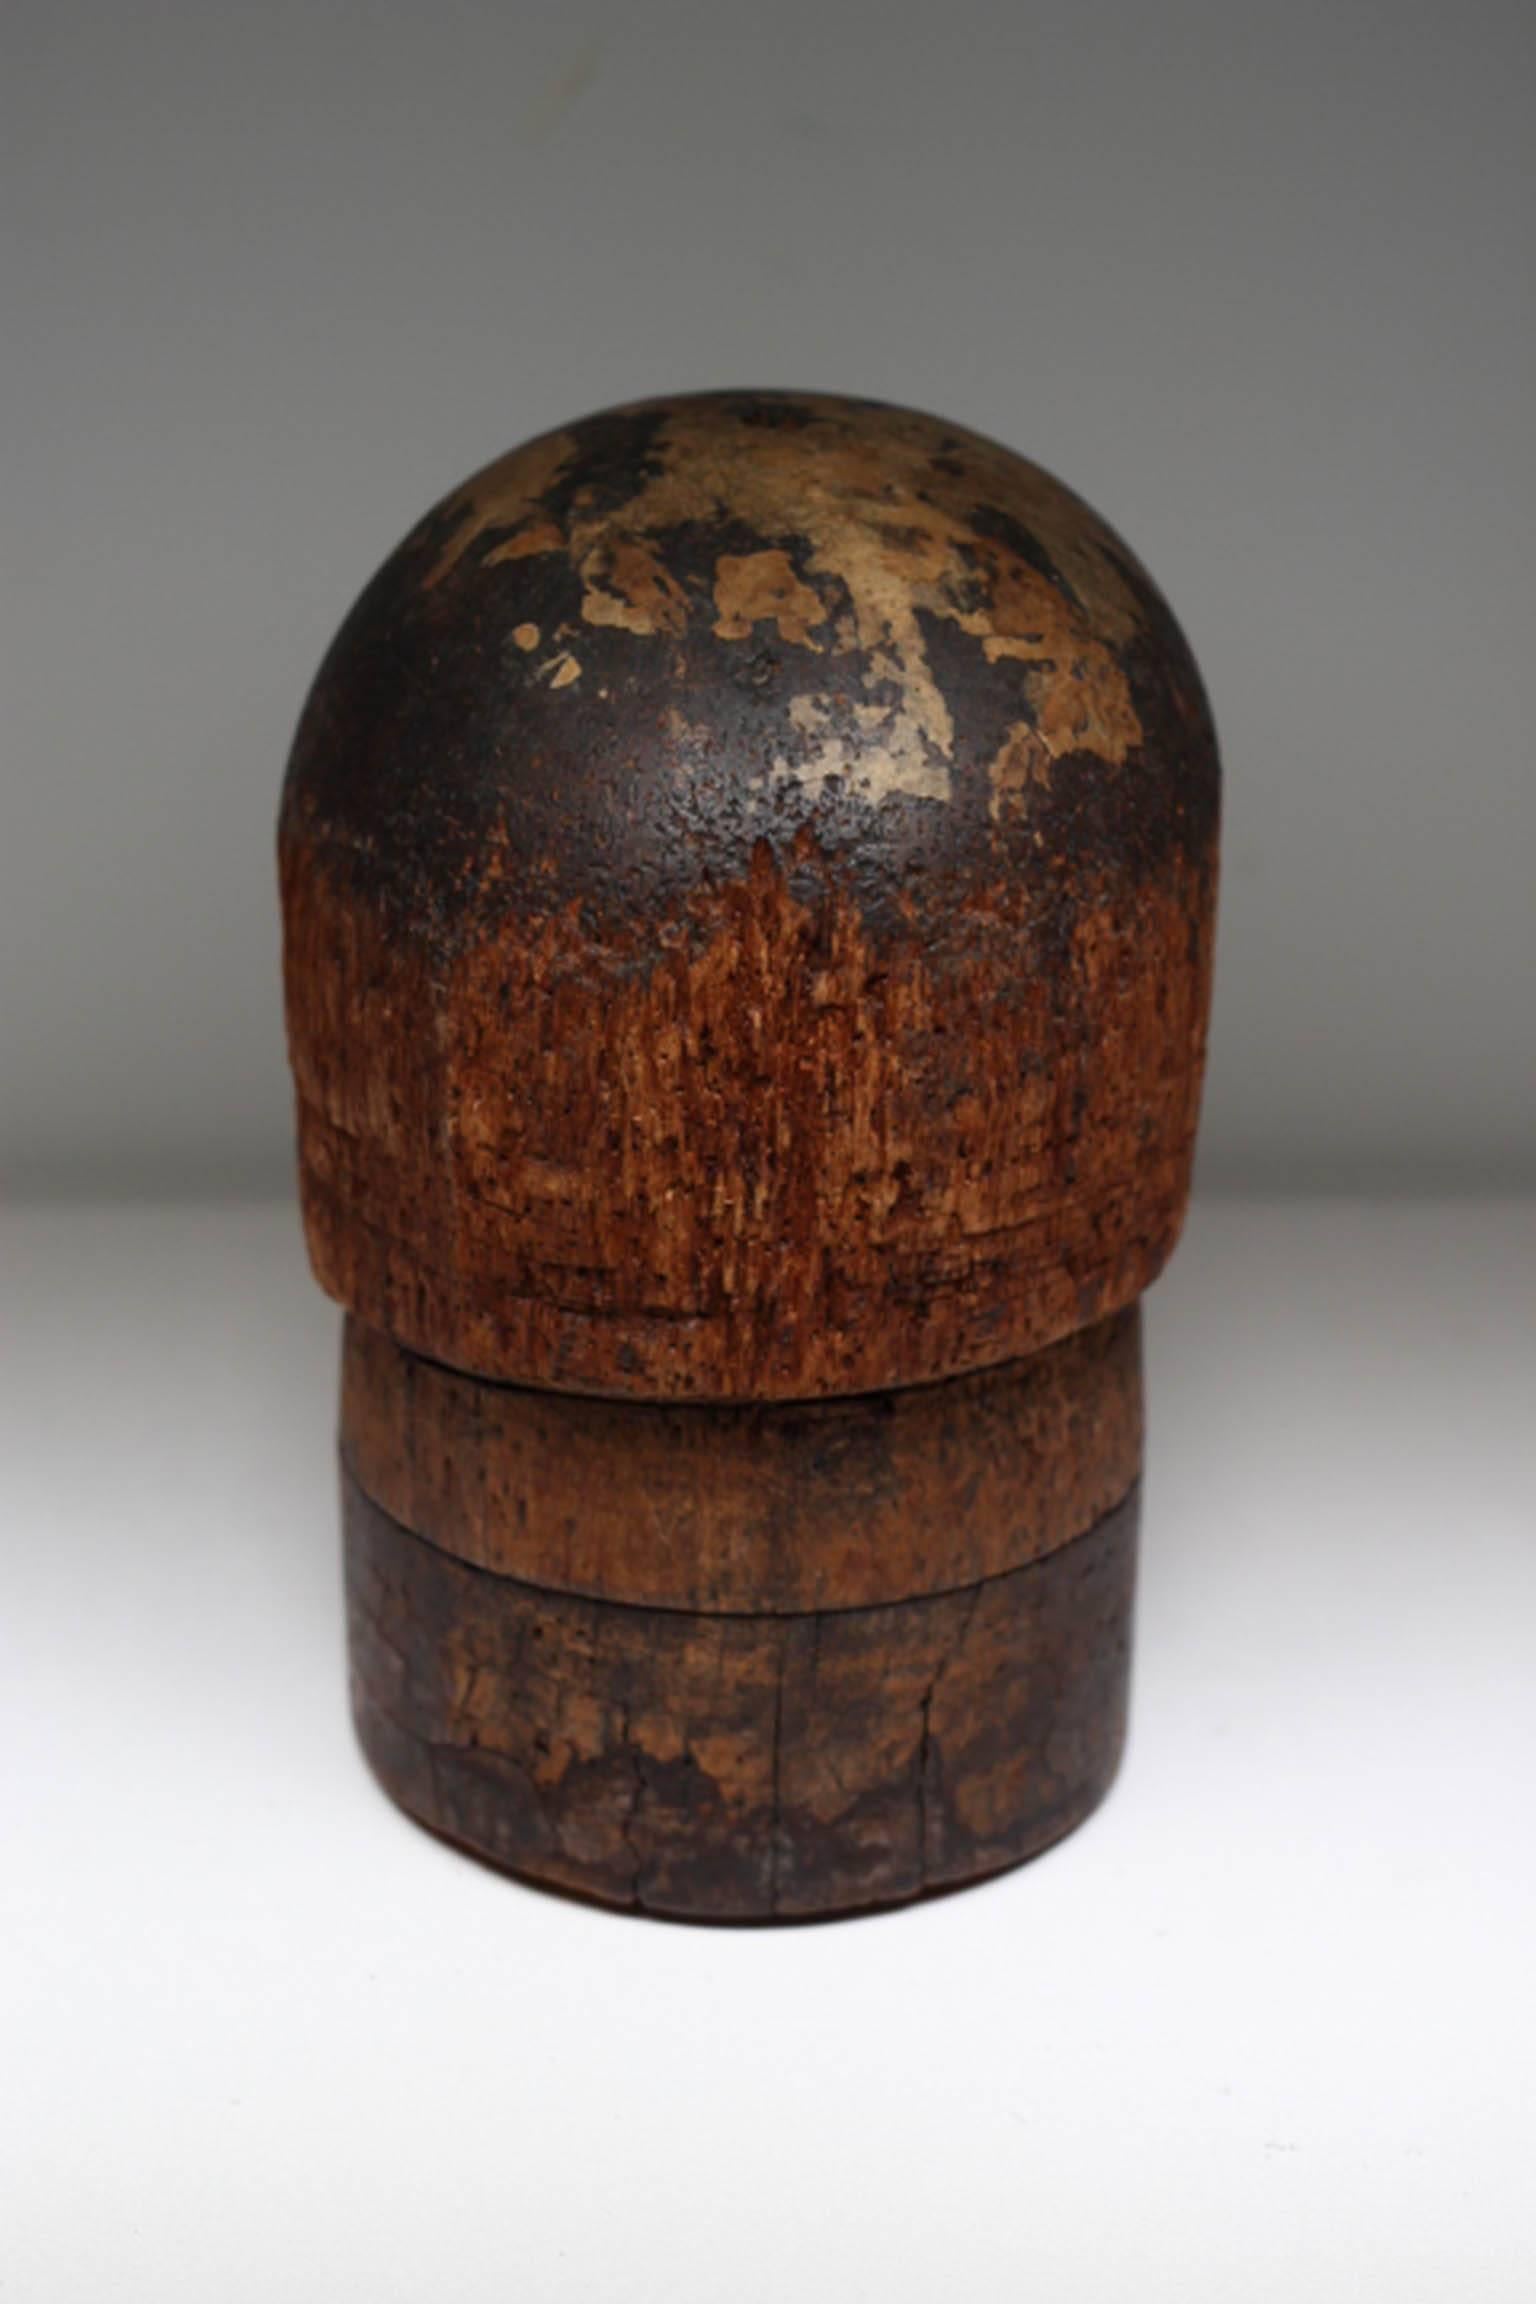 Beautifully distressed wooden hat mold.